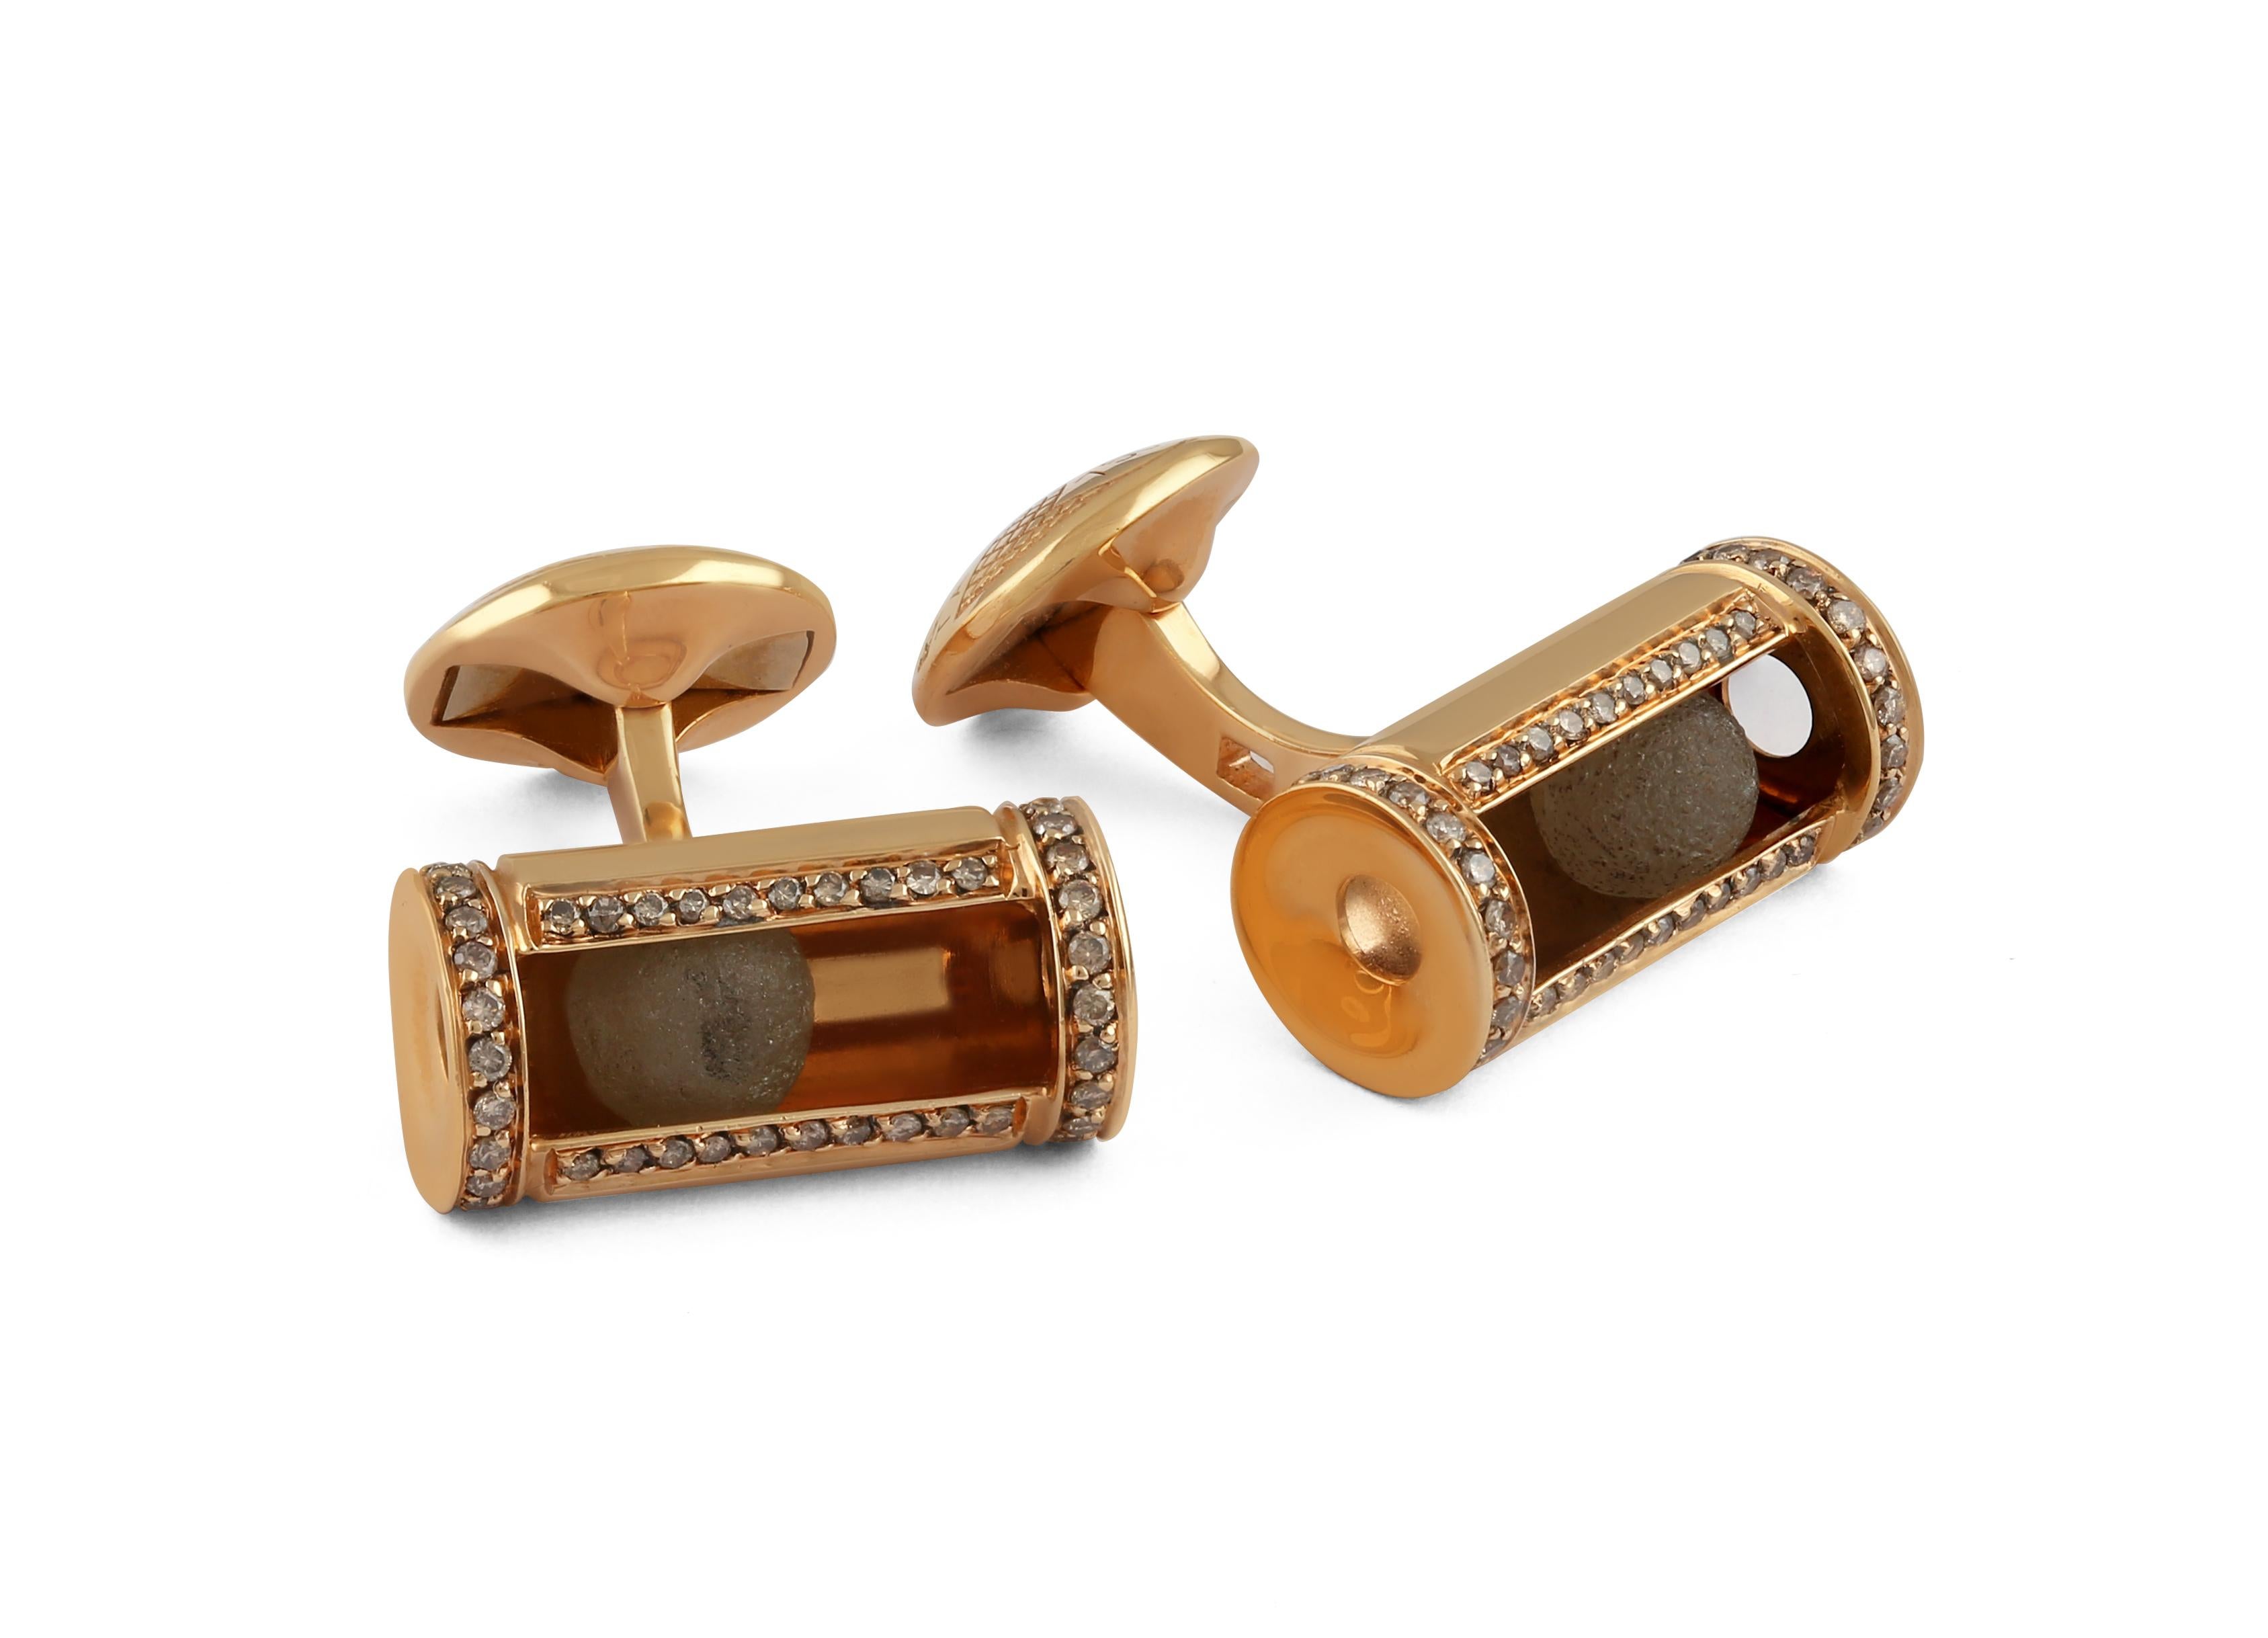 A magnificent collection of rough and polished diamonds, set within a simplistic case, decorated with frames of pave diamonds. A unique collection of one-of-a-kind cufflinks, each case expertly designed to capture the diamonds exact periphery.
